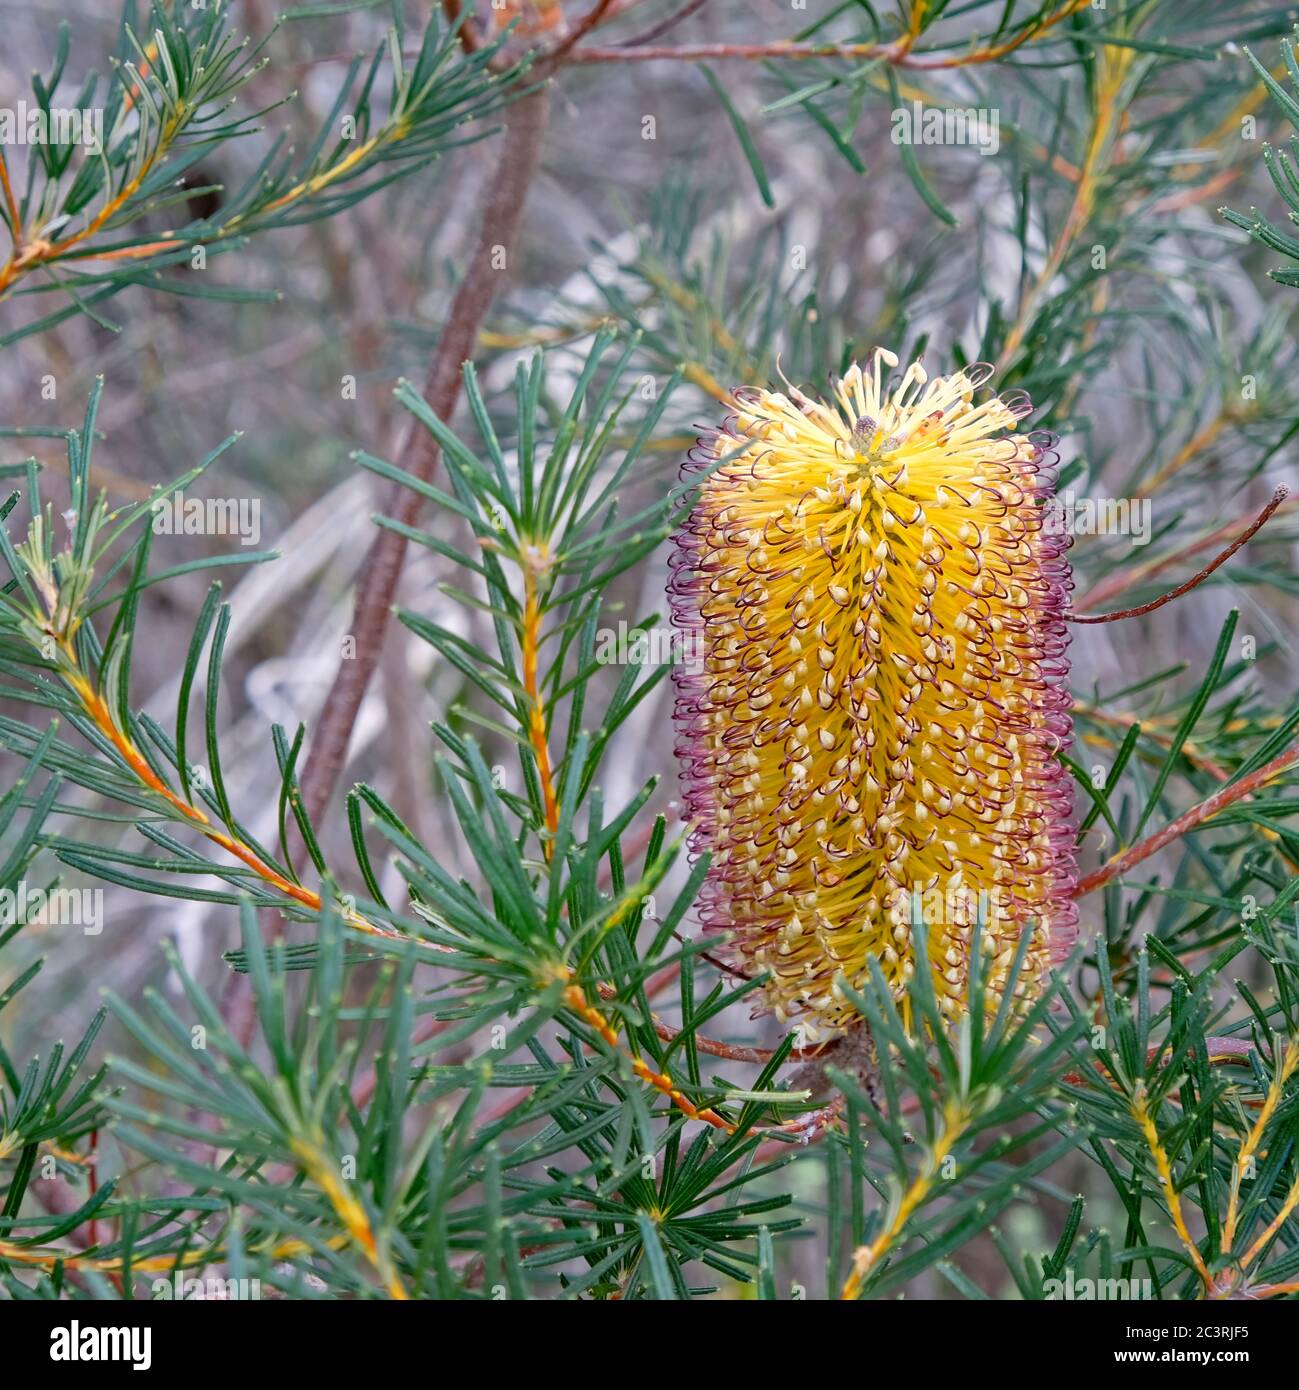 Hairpin Banksia, or Banksia spinulosa, flower surrounded by leaves Stock Photo